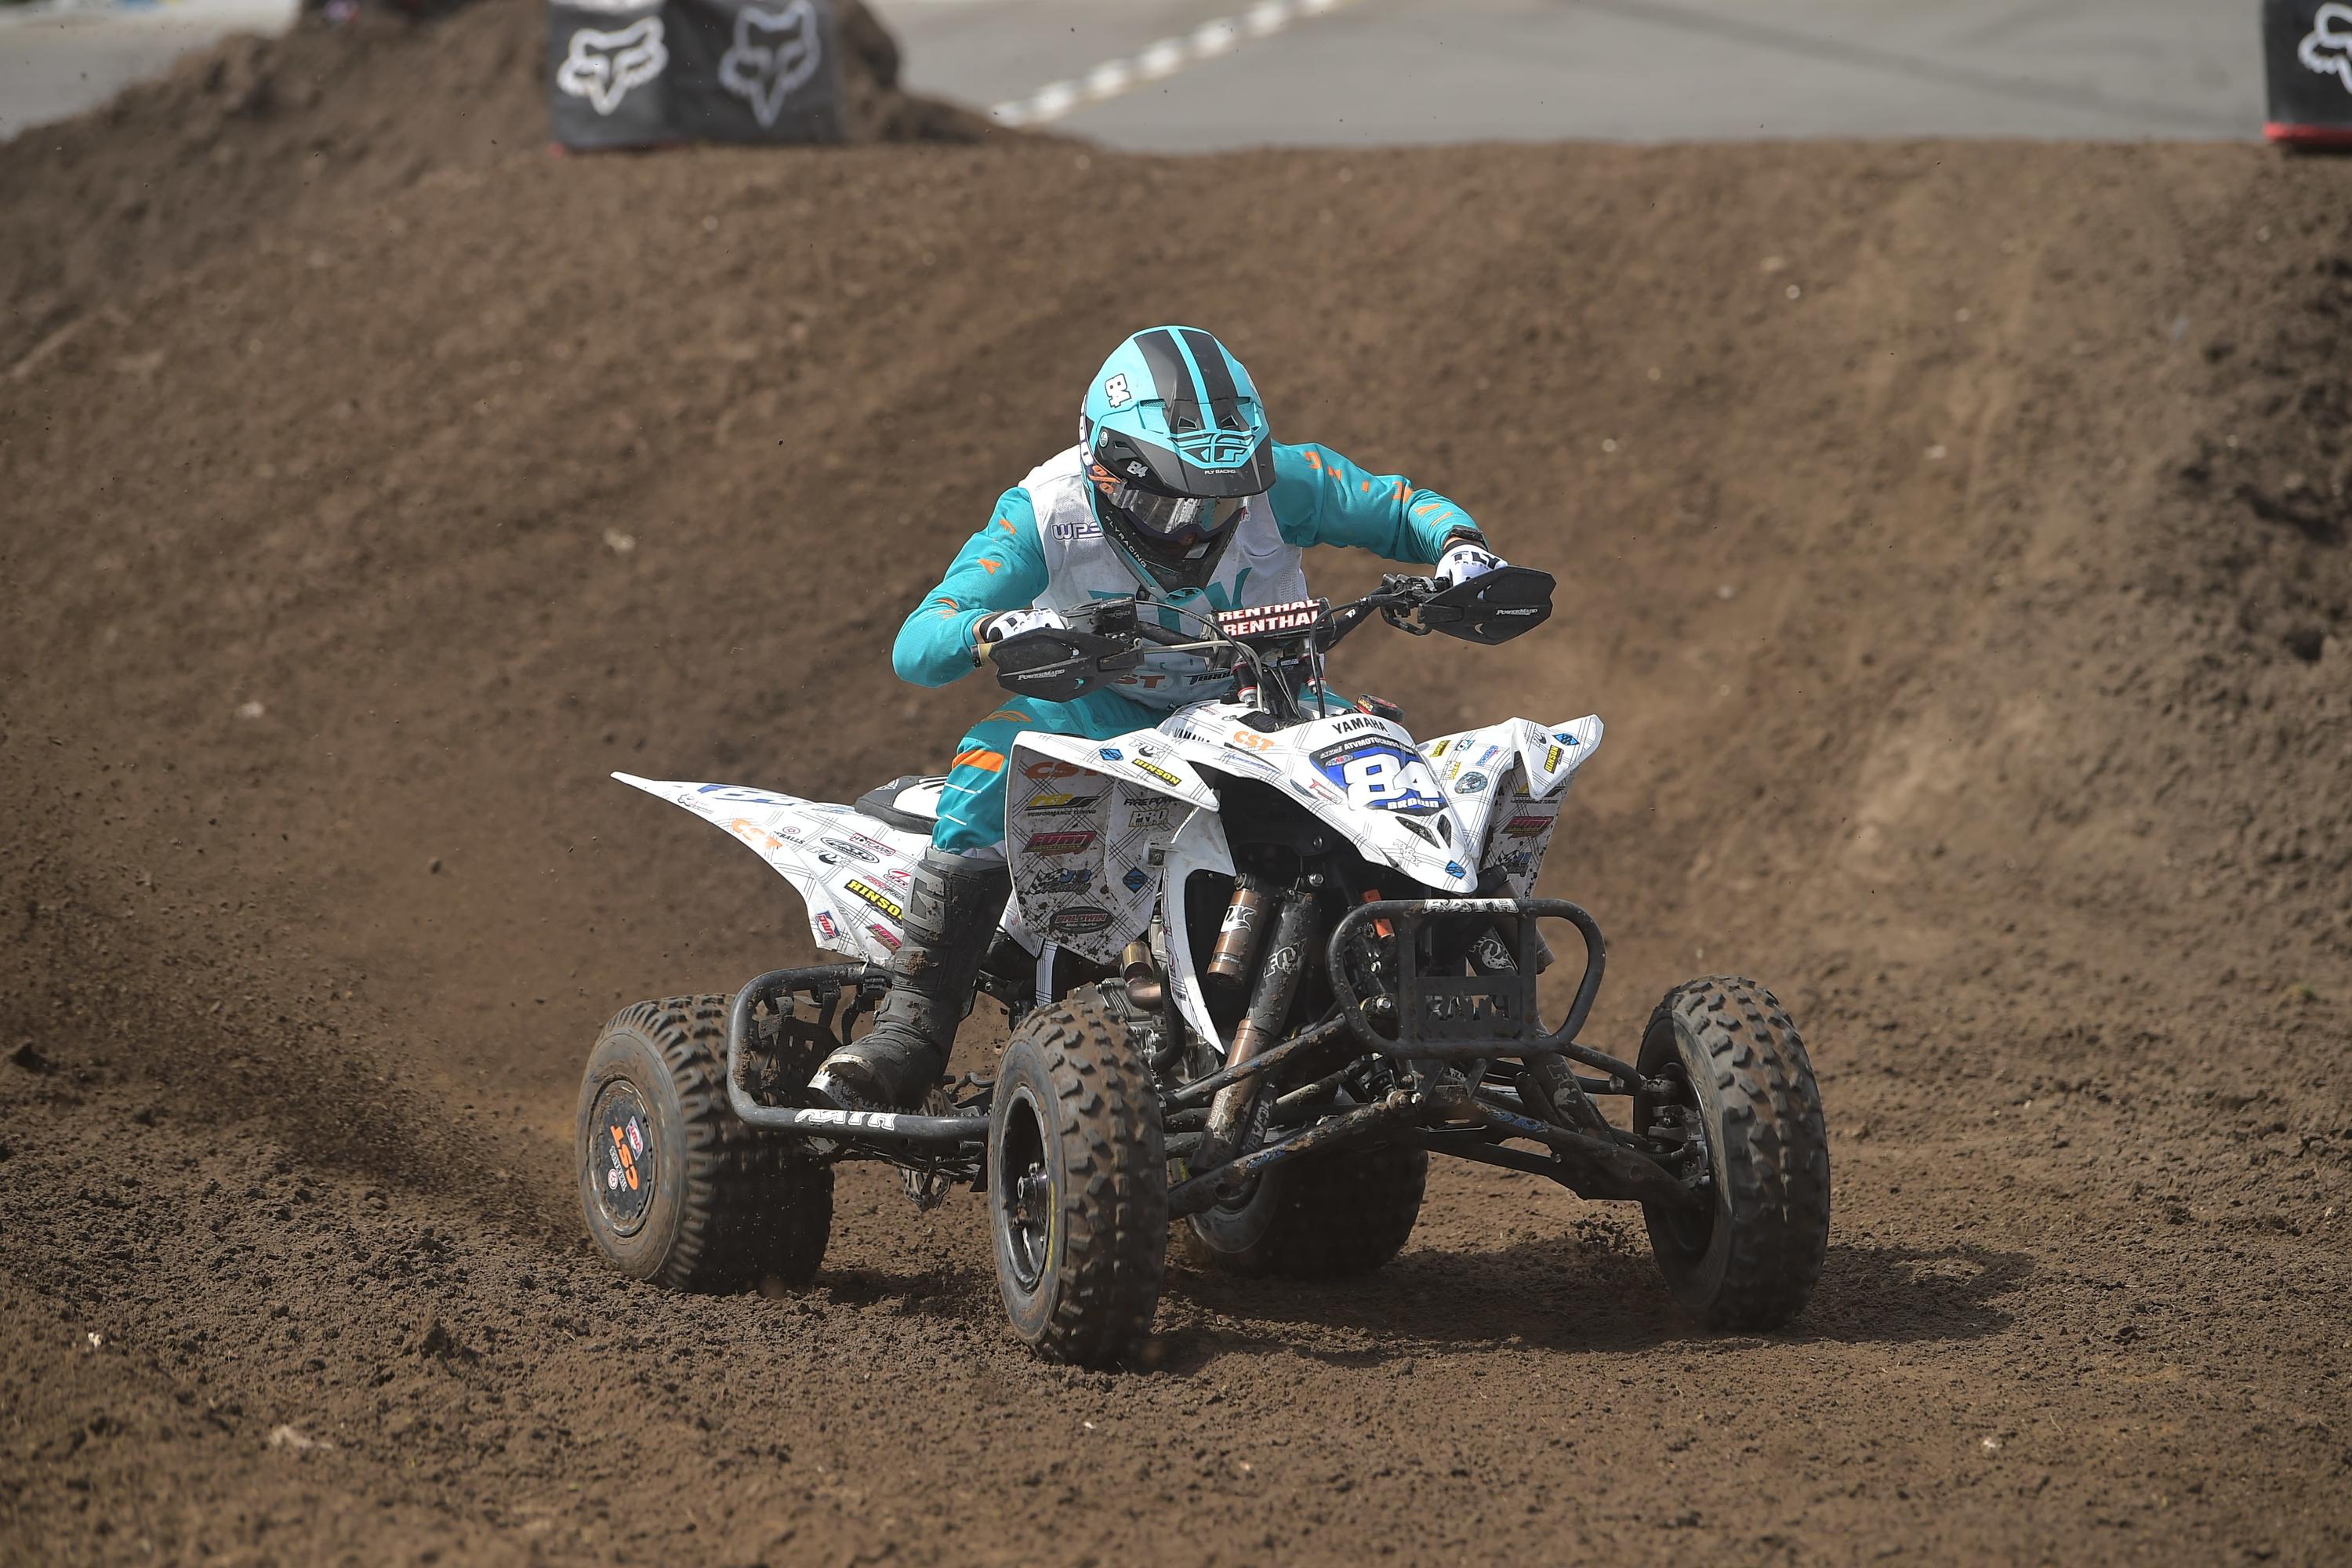 RLT Competition Bulletin 2020-10: Update to GNCC and ATVMX Schedules